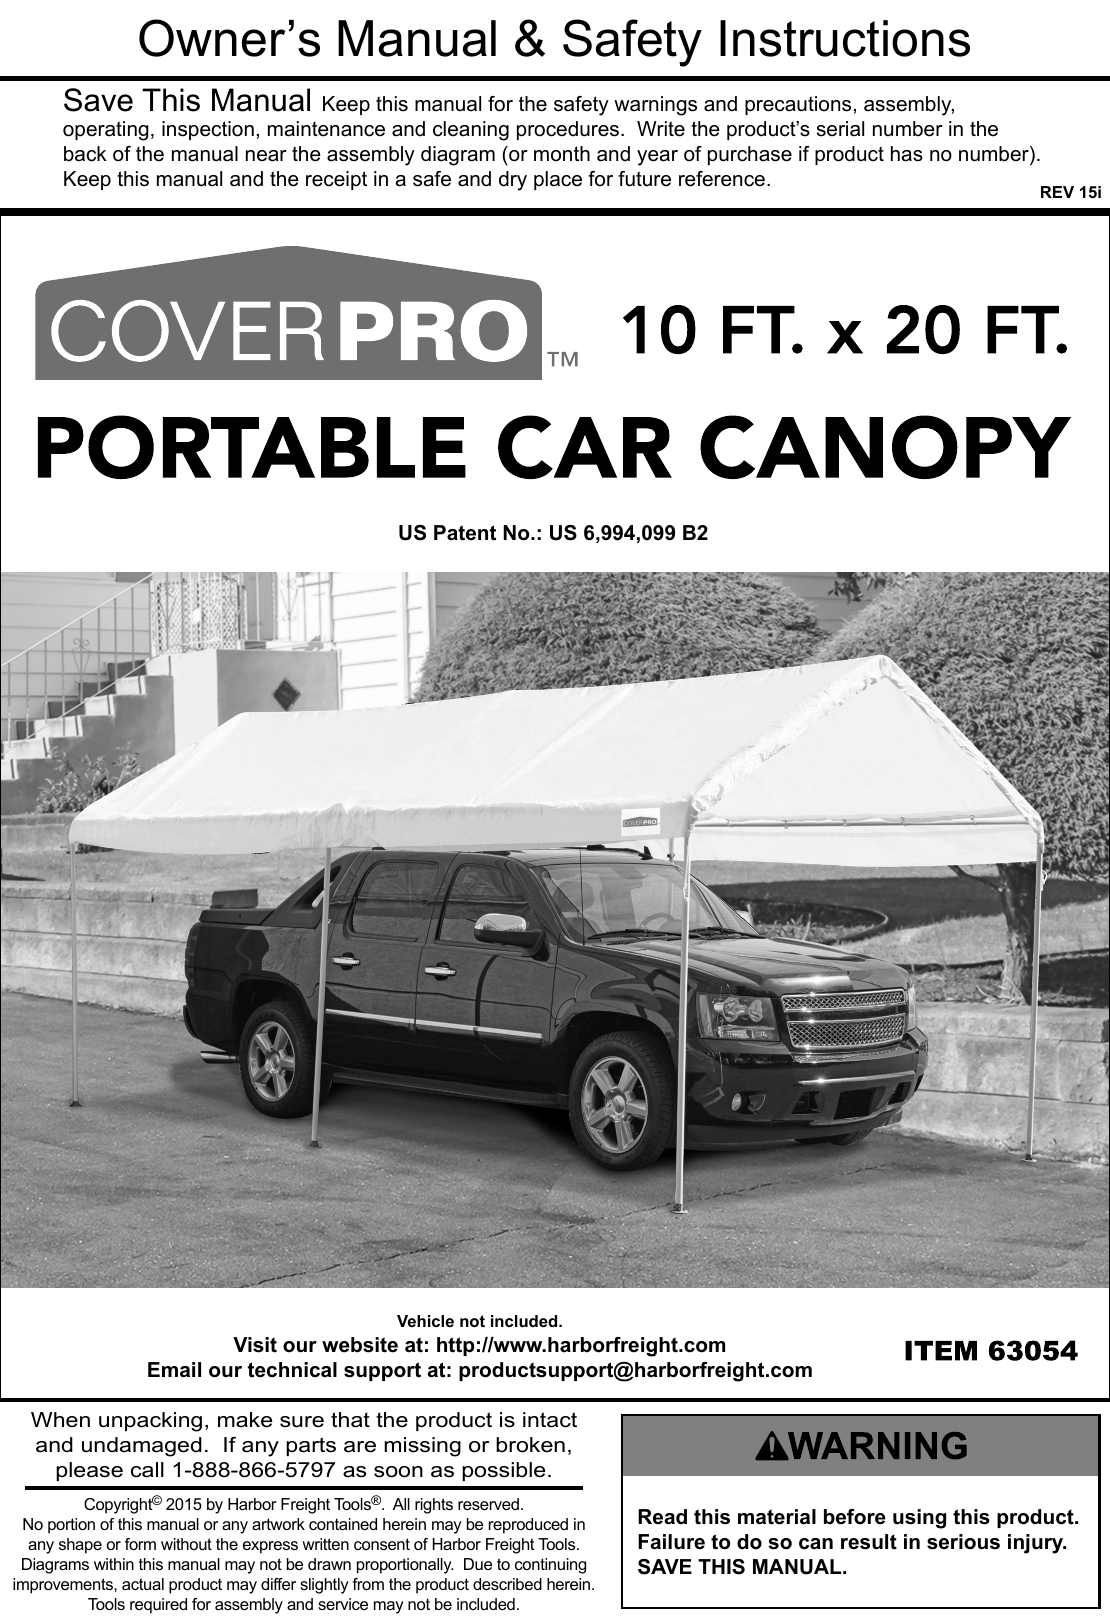 Manual For The 63054 10 Ft X 20 Portable Car Canopy